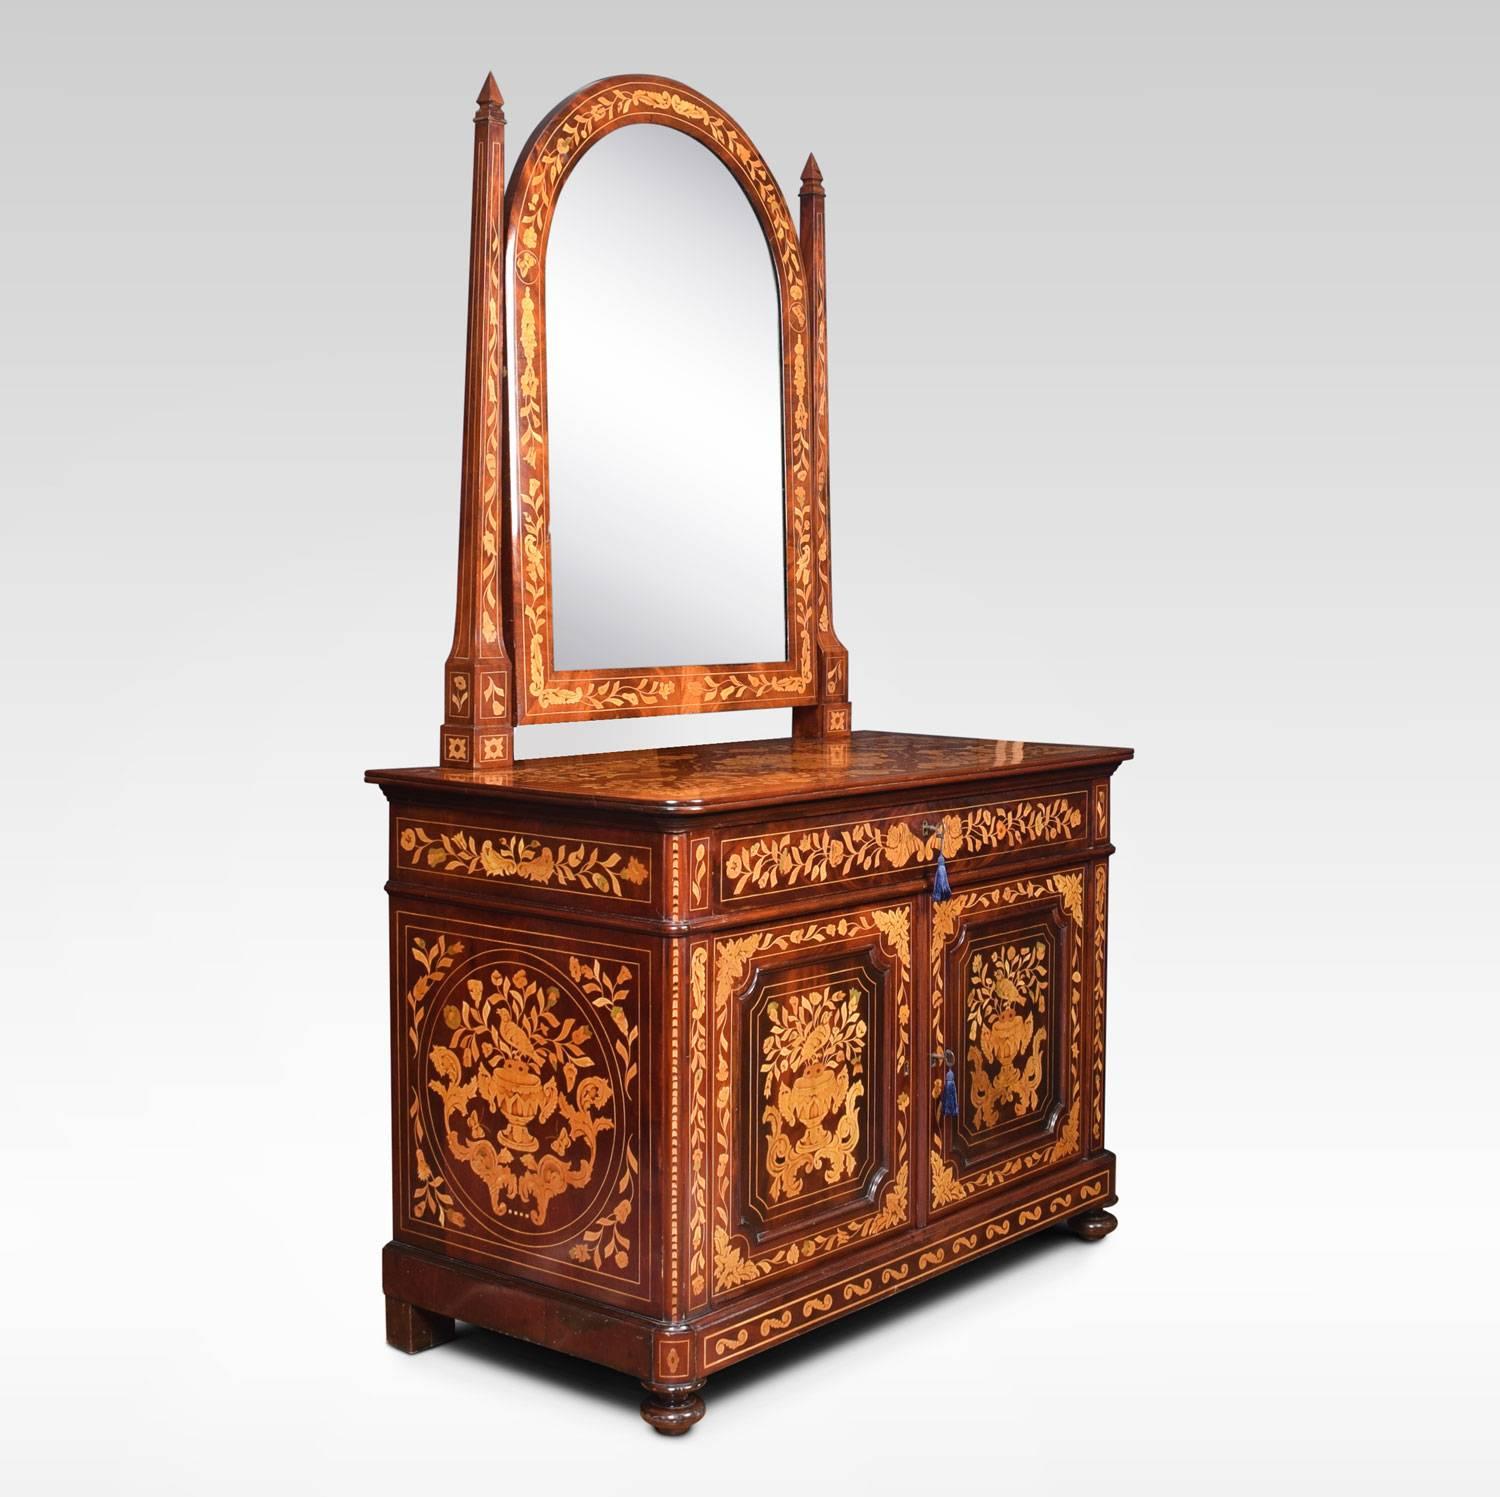 Dutch mahogany and marquetry inlaid dressing table the arched mirror between tapered uprights to the base section fitted with long frieze drawer over a pair of cupboard doors with floral, bird, and urn marquetry, opening to reveal a shelved